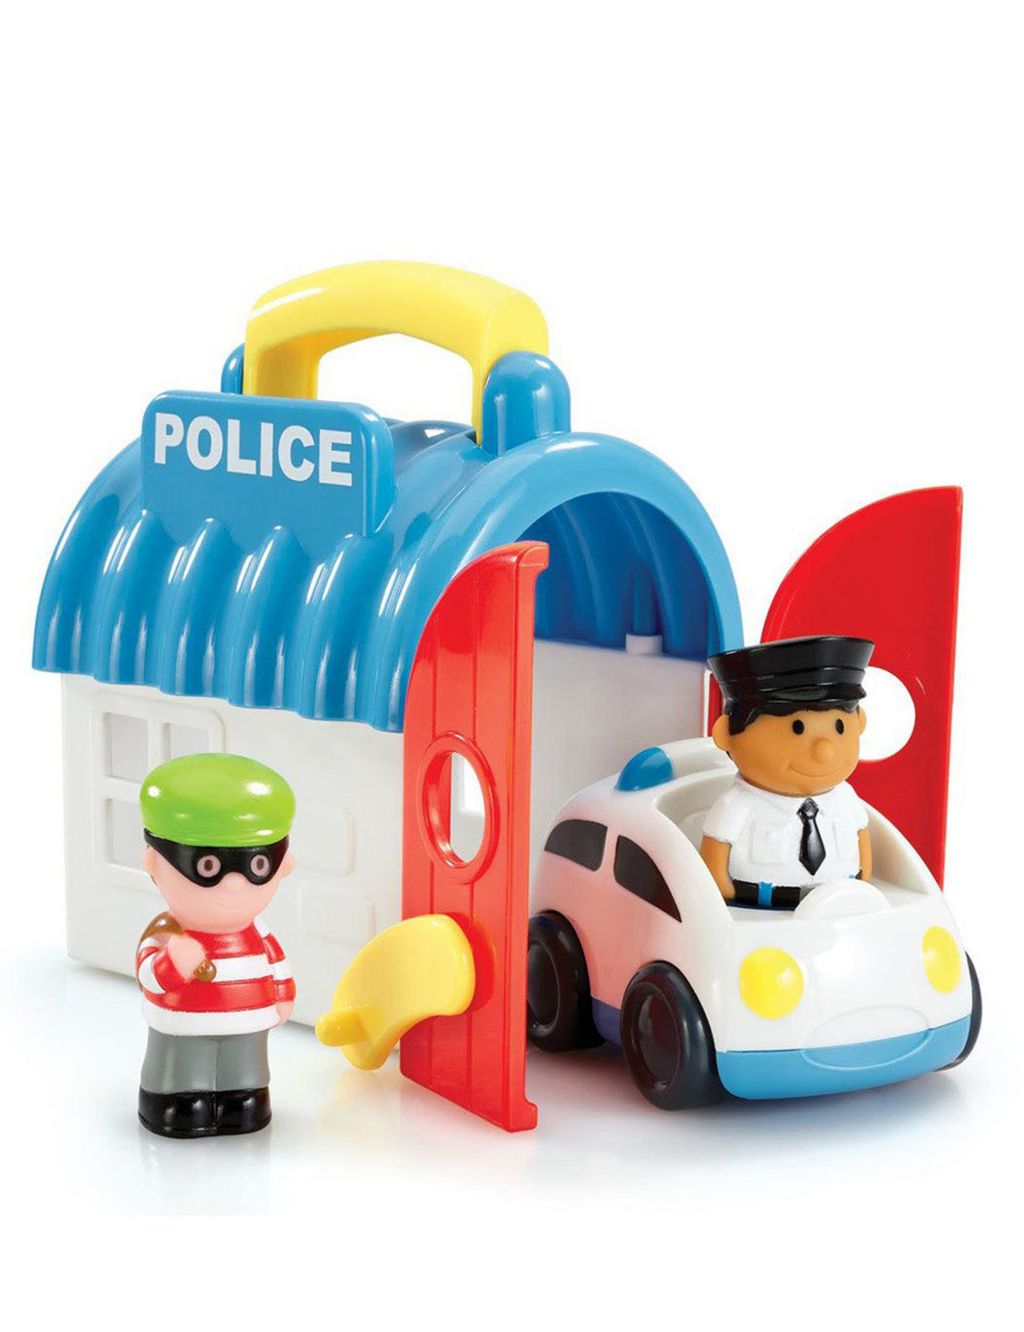 Happyland Take and Go Police Station (18 Mths - 5 Yrs) image 1